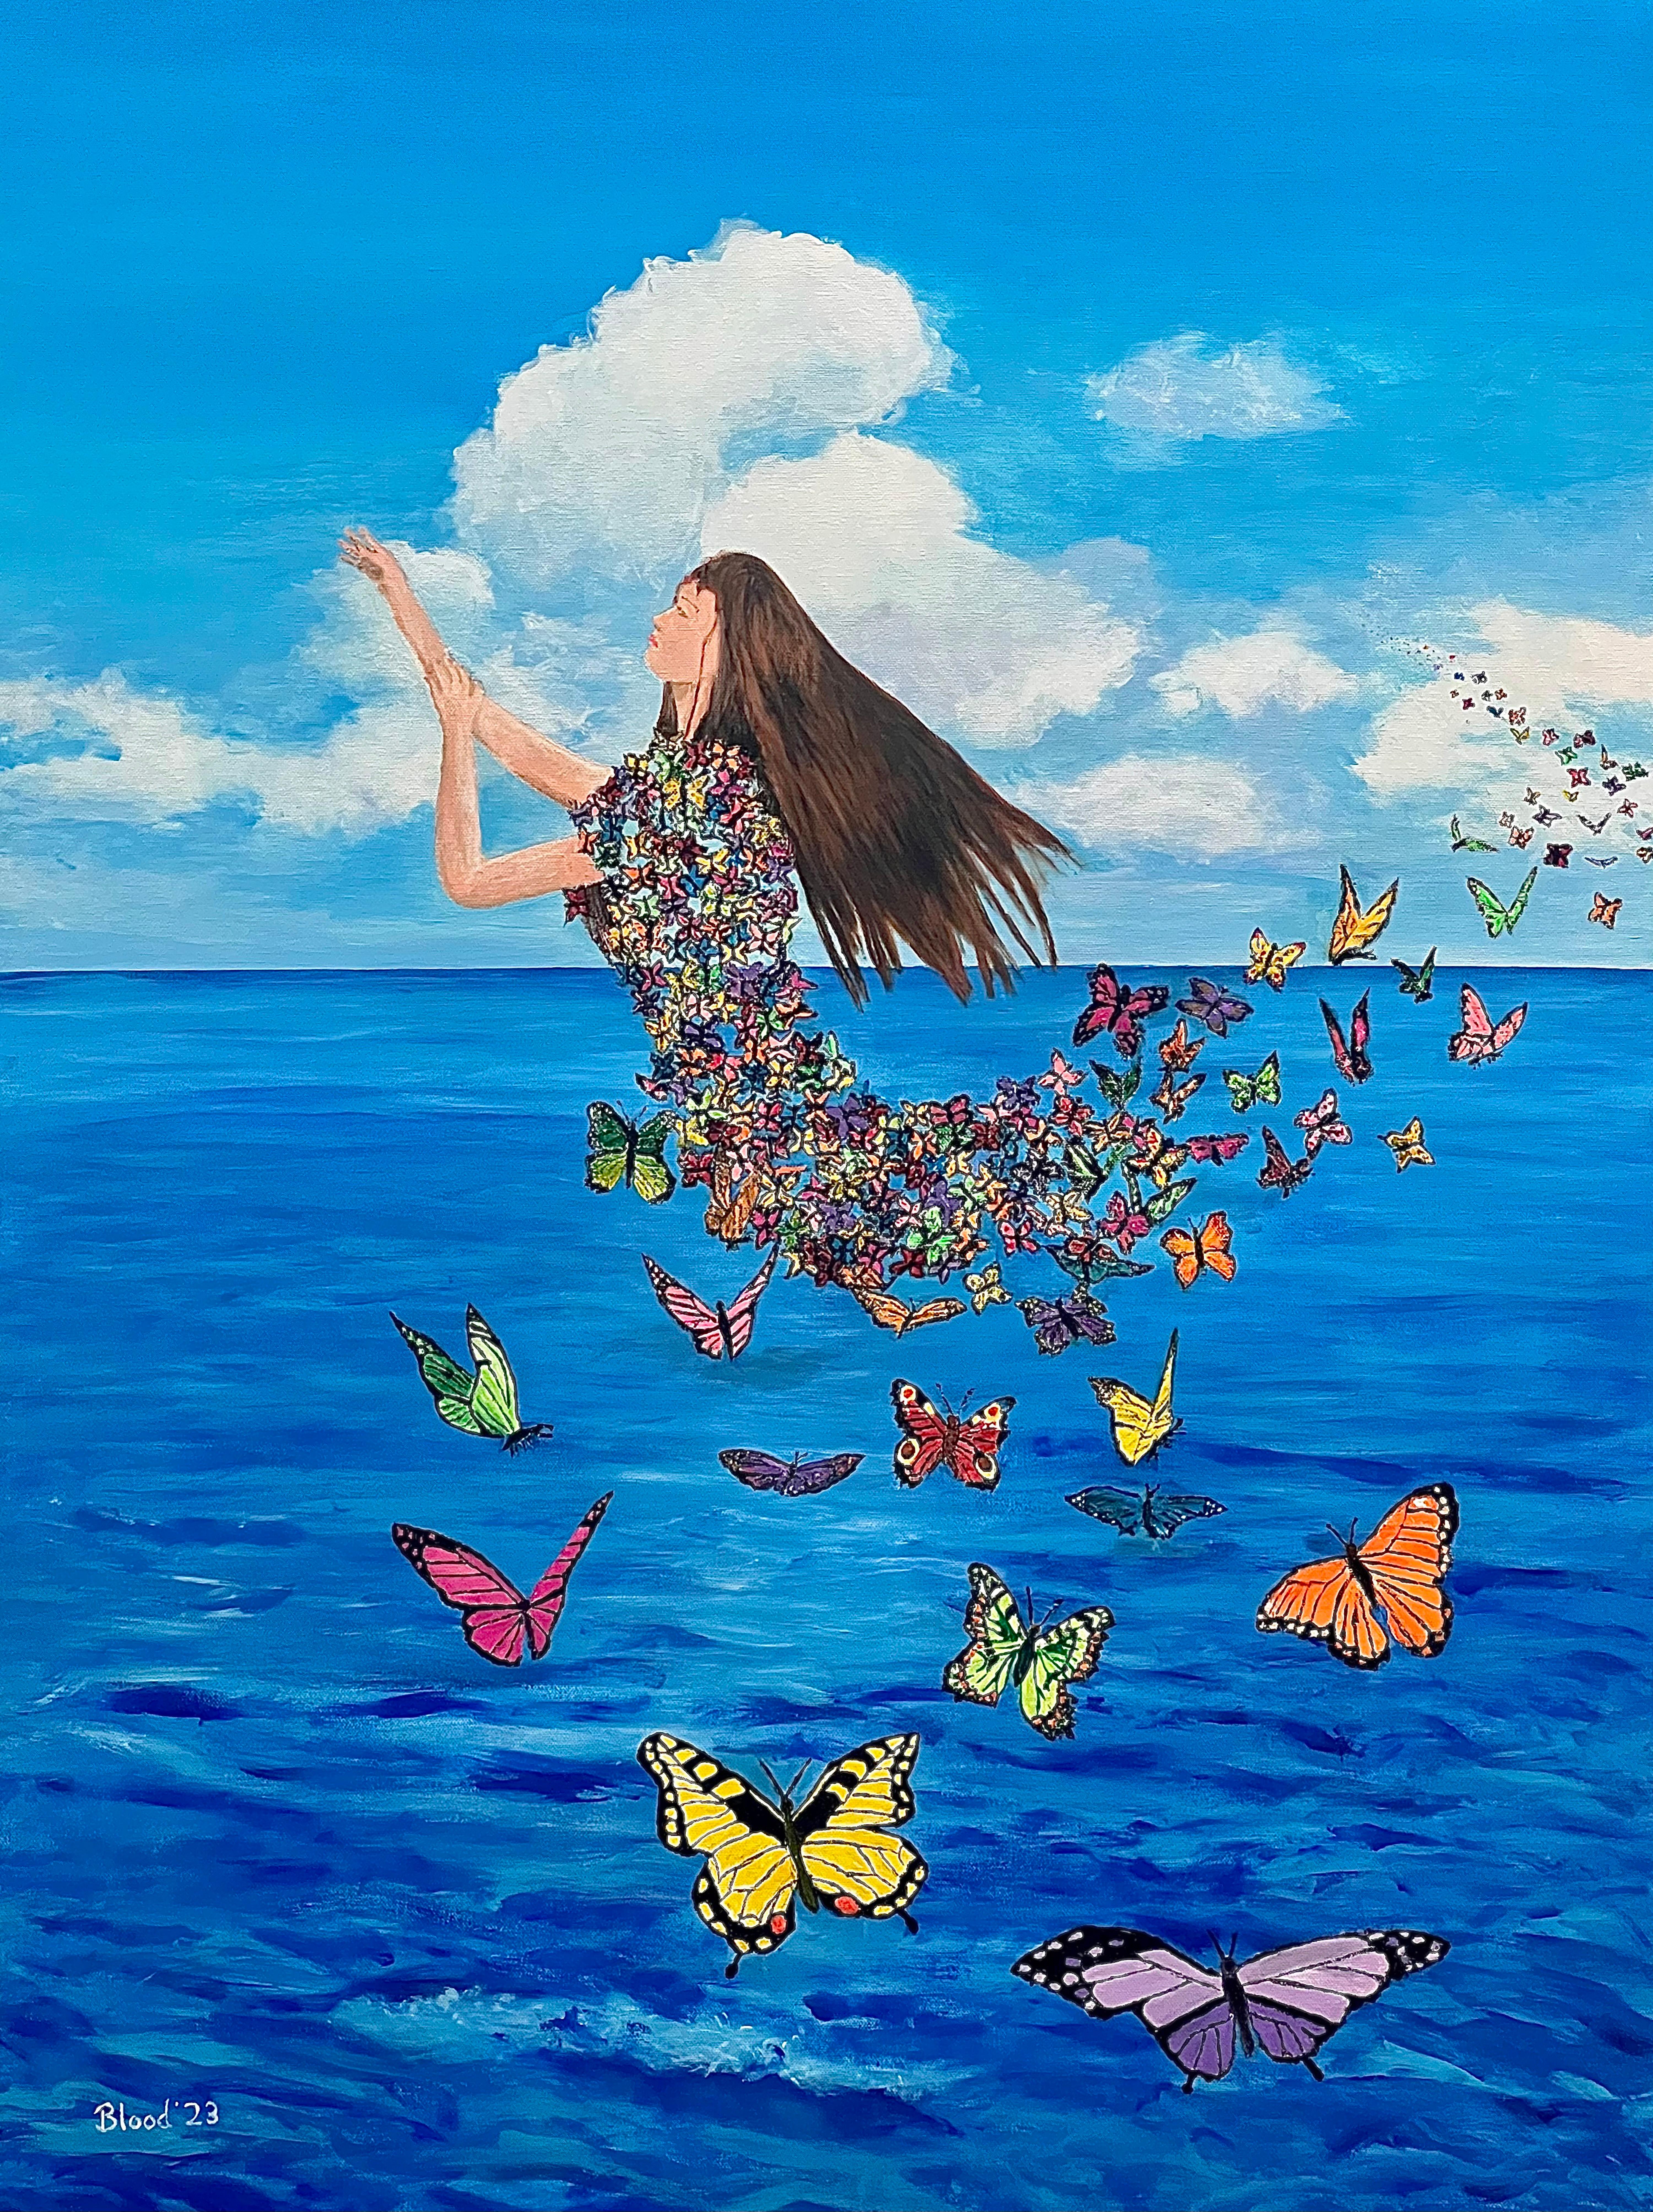 Tom Blood Figurative Painting - Butterfly Dreams, Original Surrealist Painting